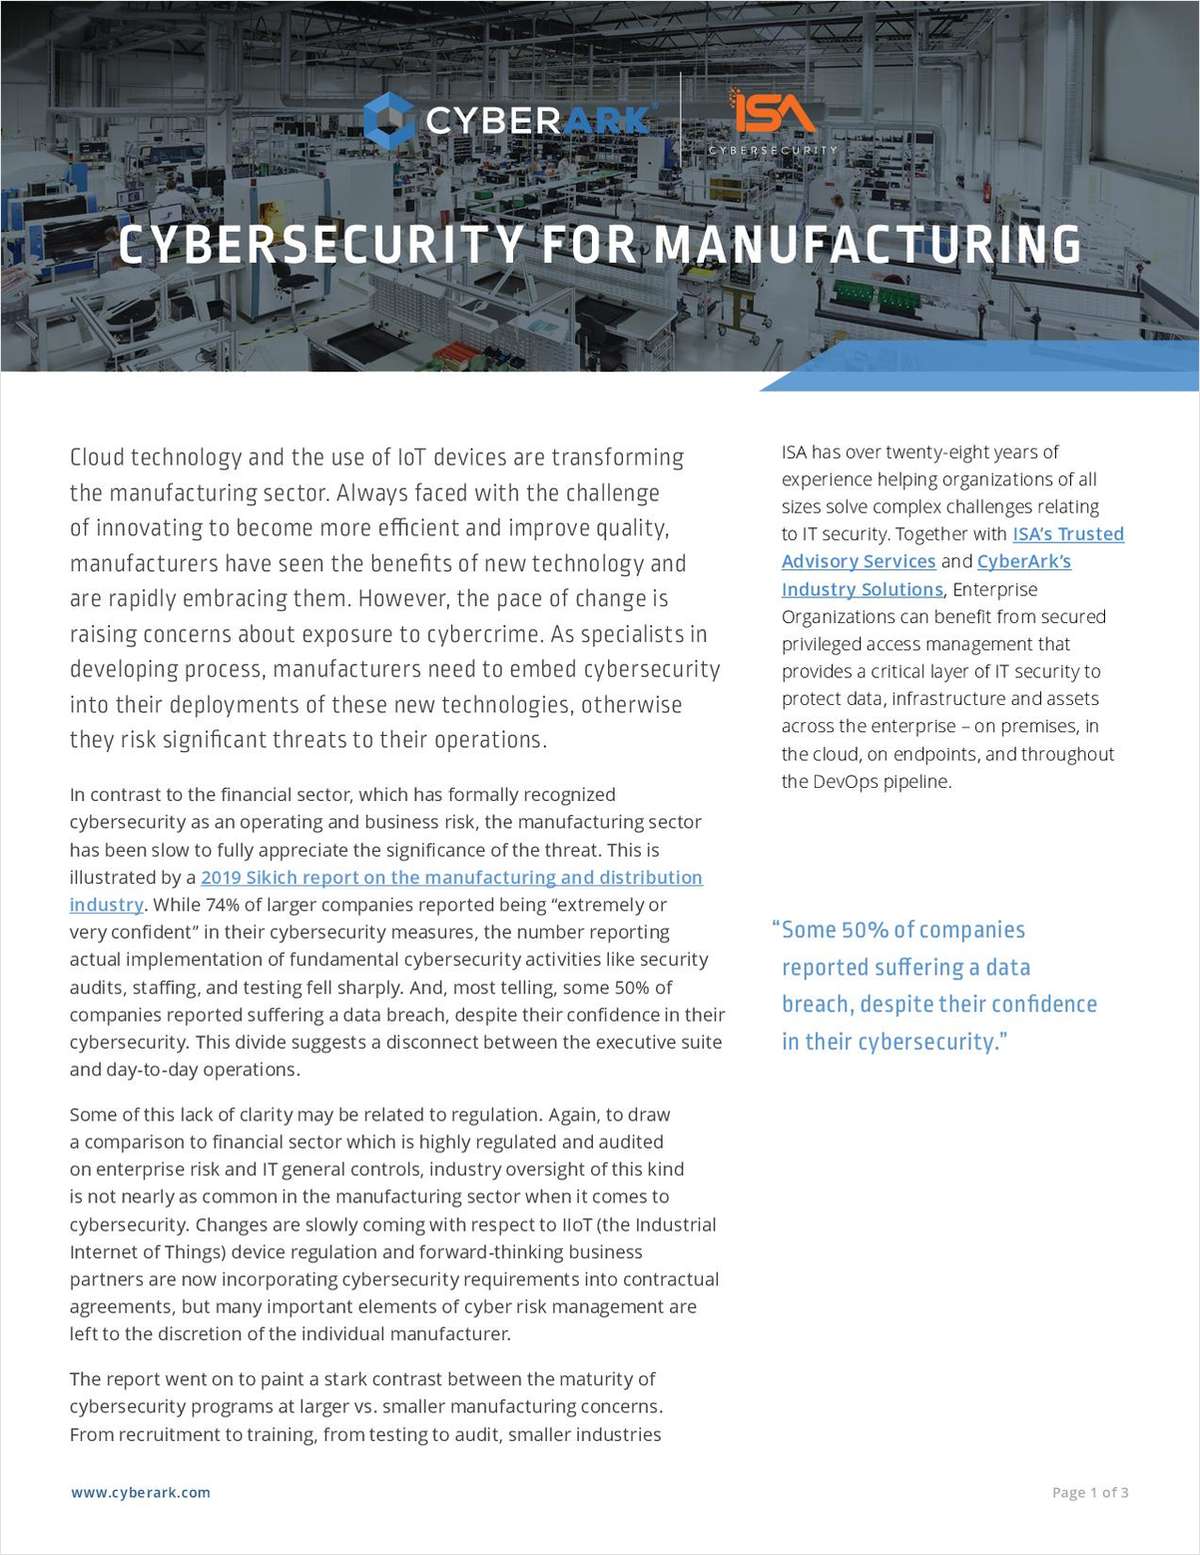 Cybersecurity for Manufacturing